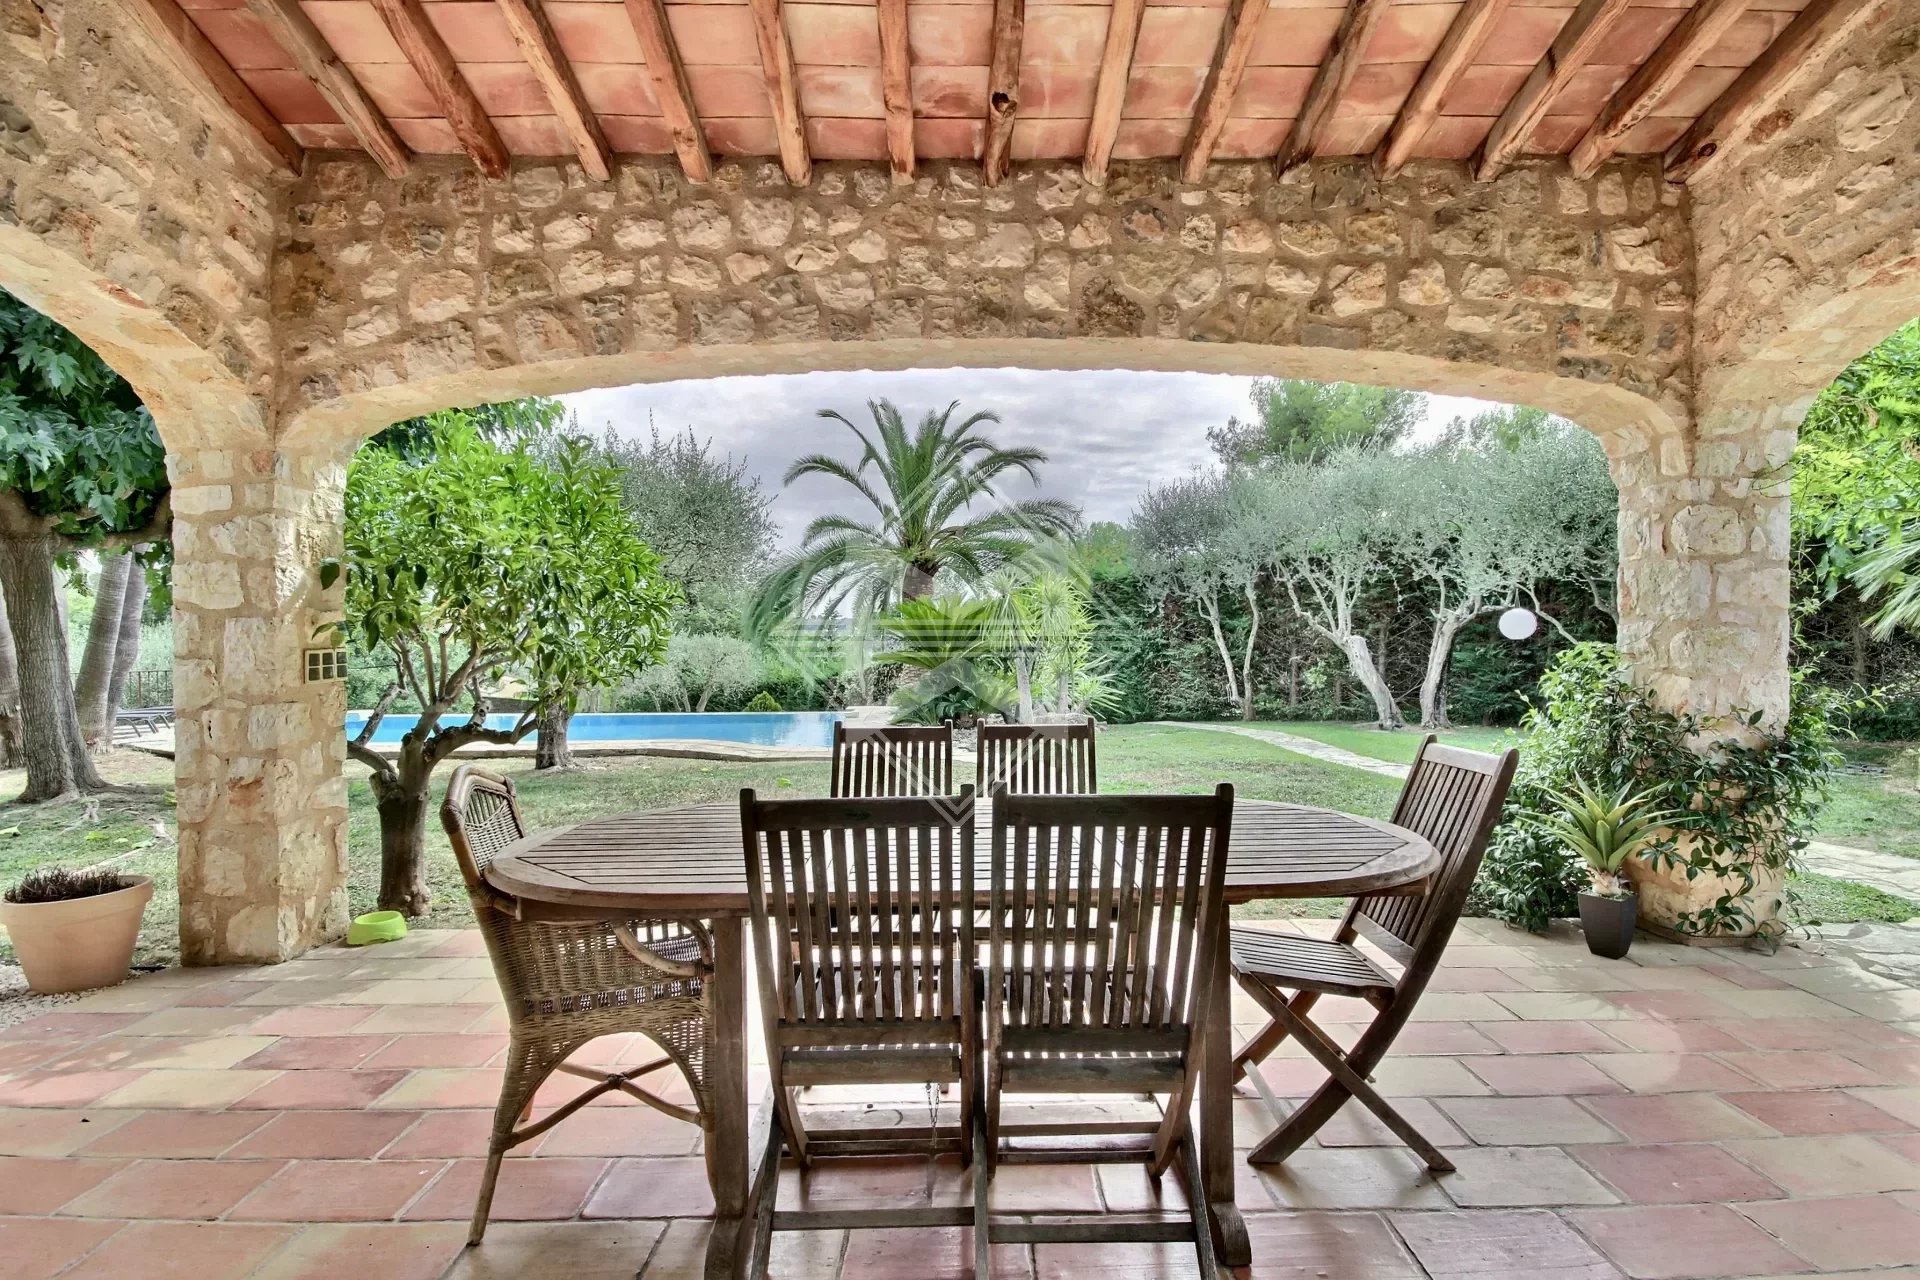 Stone house within walking distance of the village of Valbonne